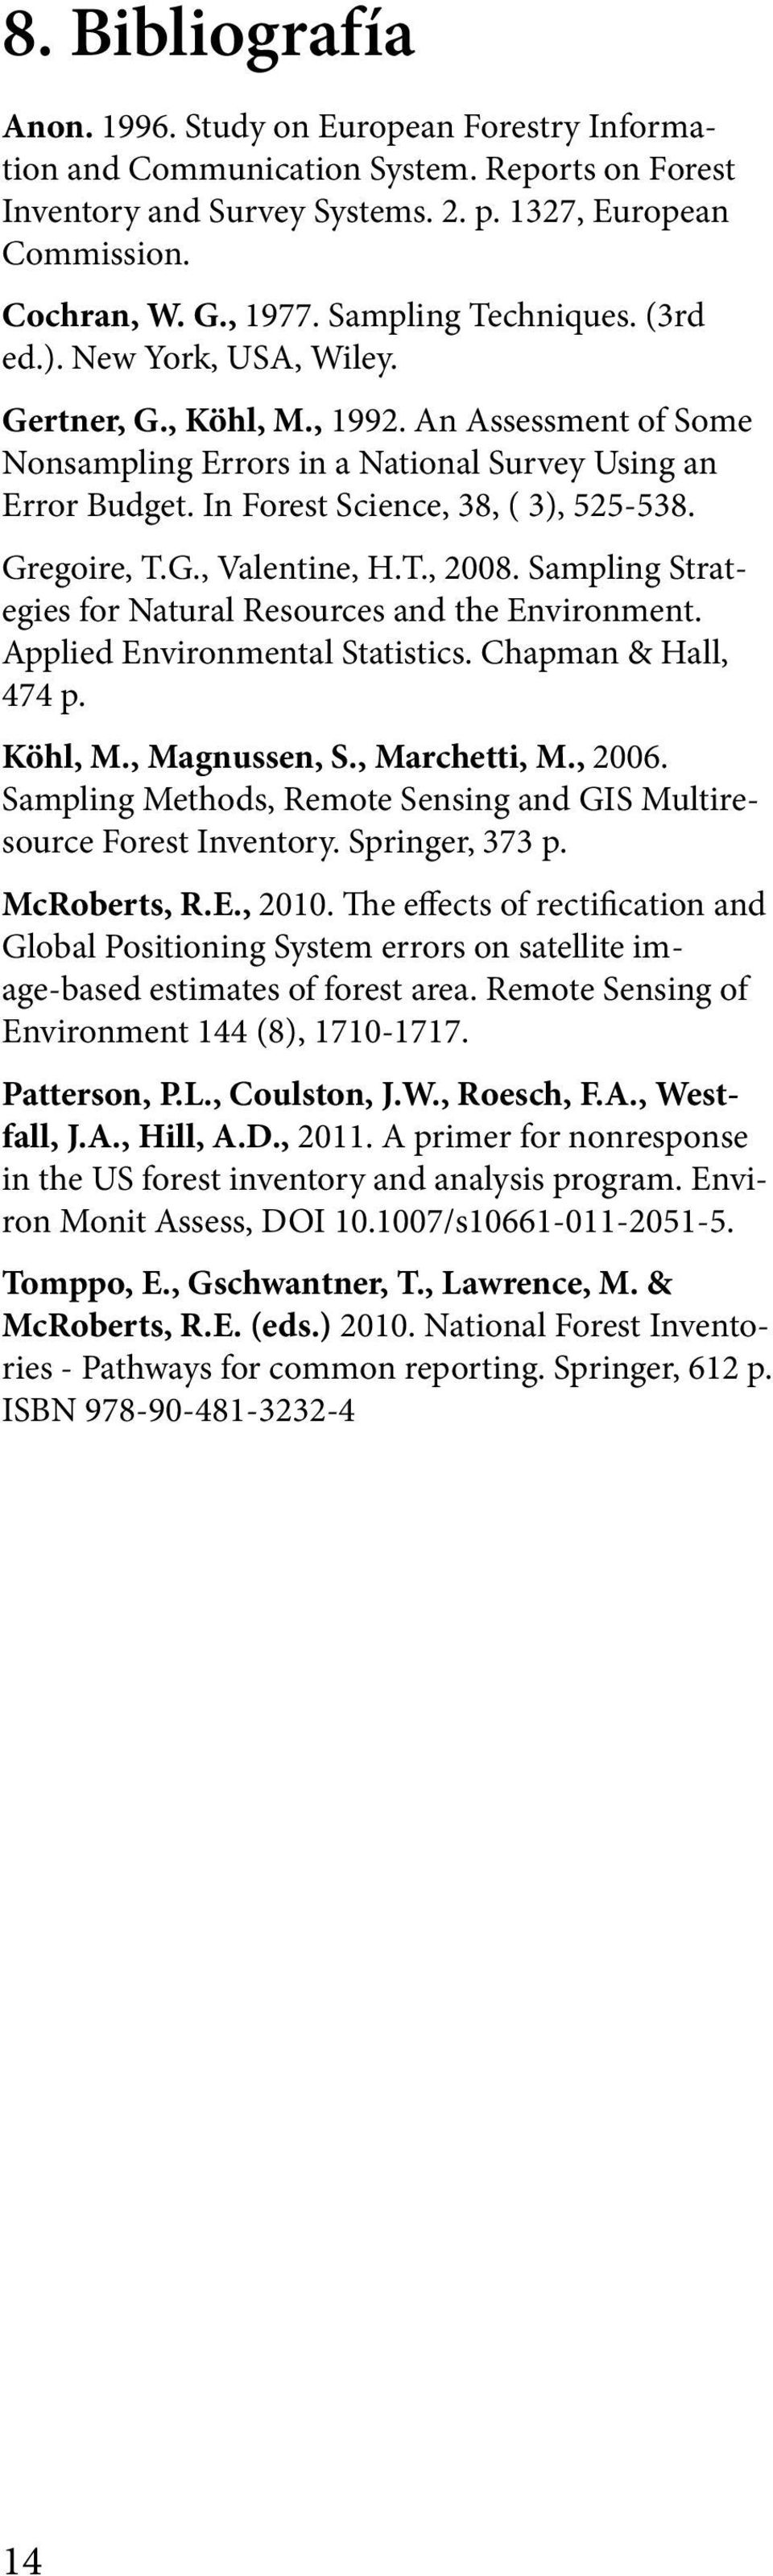 In Forest Science, 38, ( 3), 525-538. Gregoire, T.G., Valentine, H.T., 2008. Sampling Strategies for Natural Resources and the Environment. Applied Environmental Statistics. Chapman & Hall, 474 p.